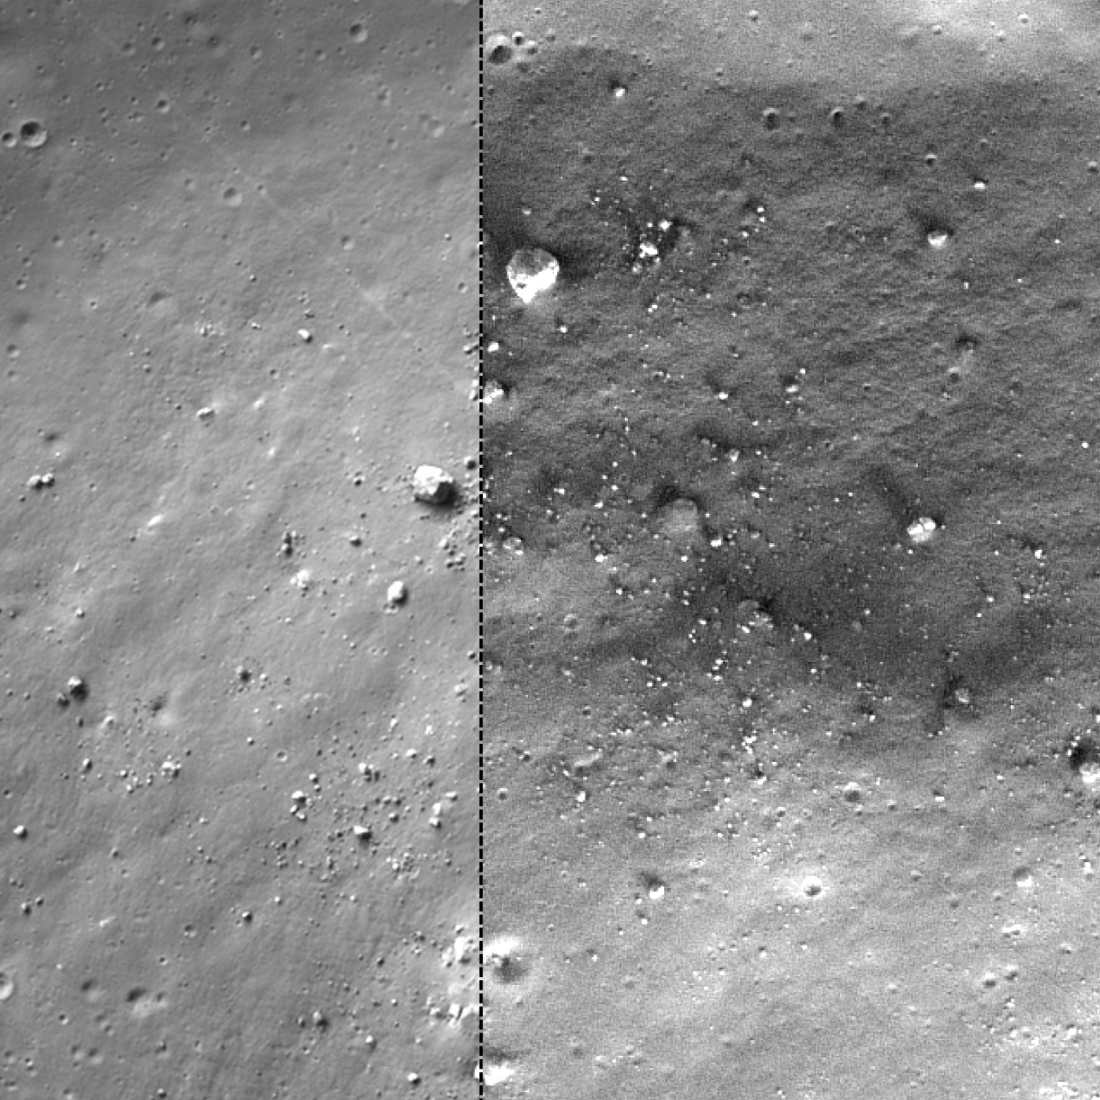 High SNR (left) and low SNR (right) floor of Shackleton crater